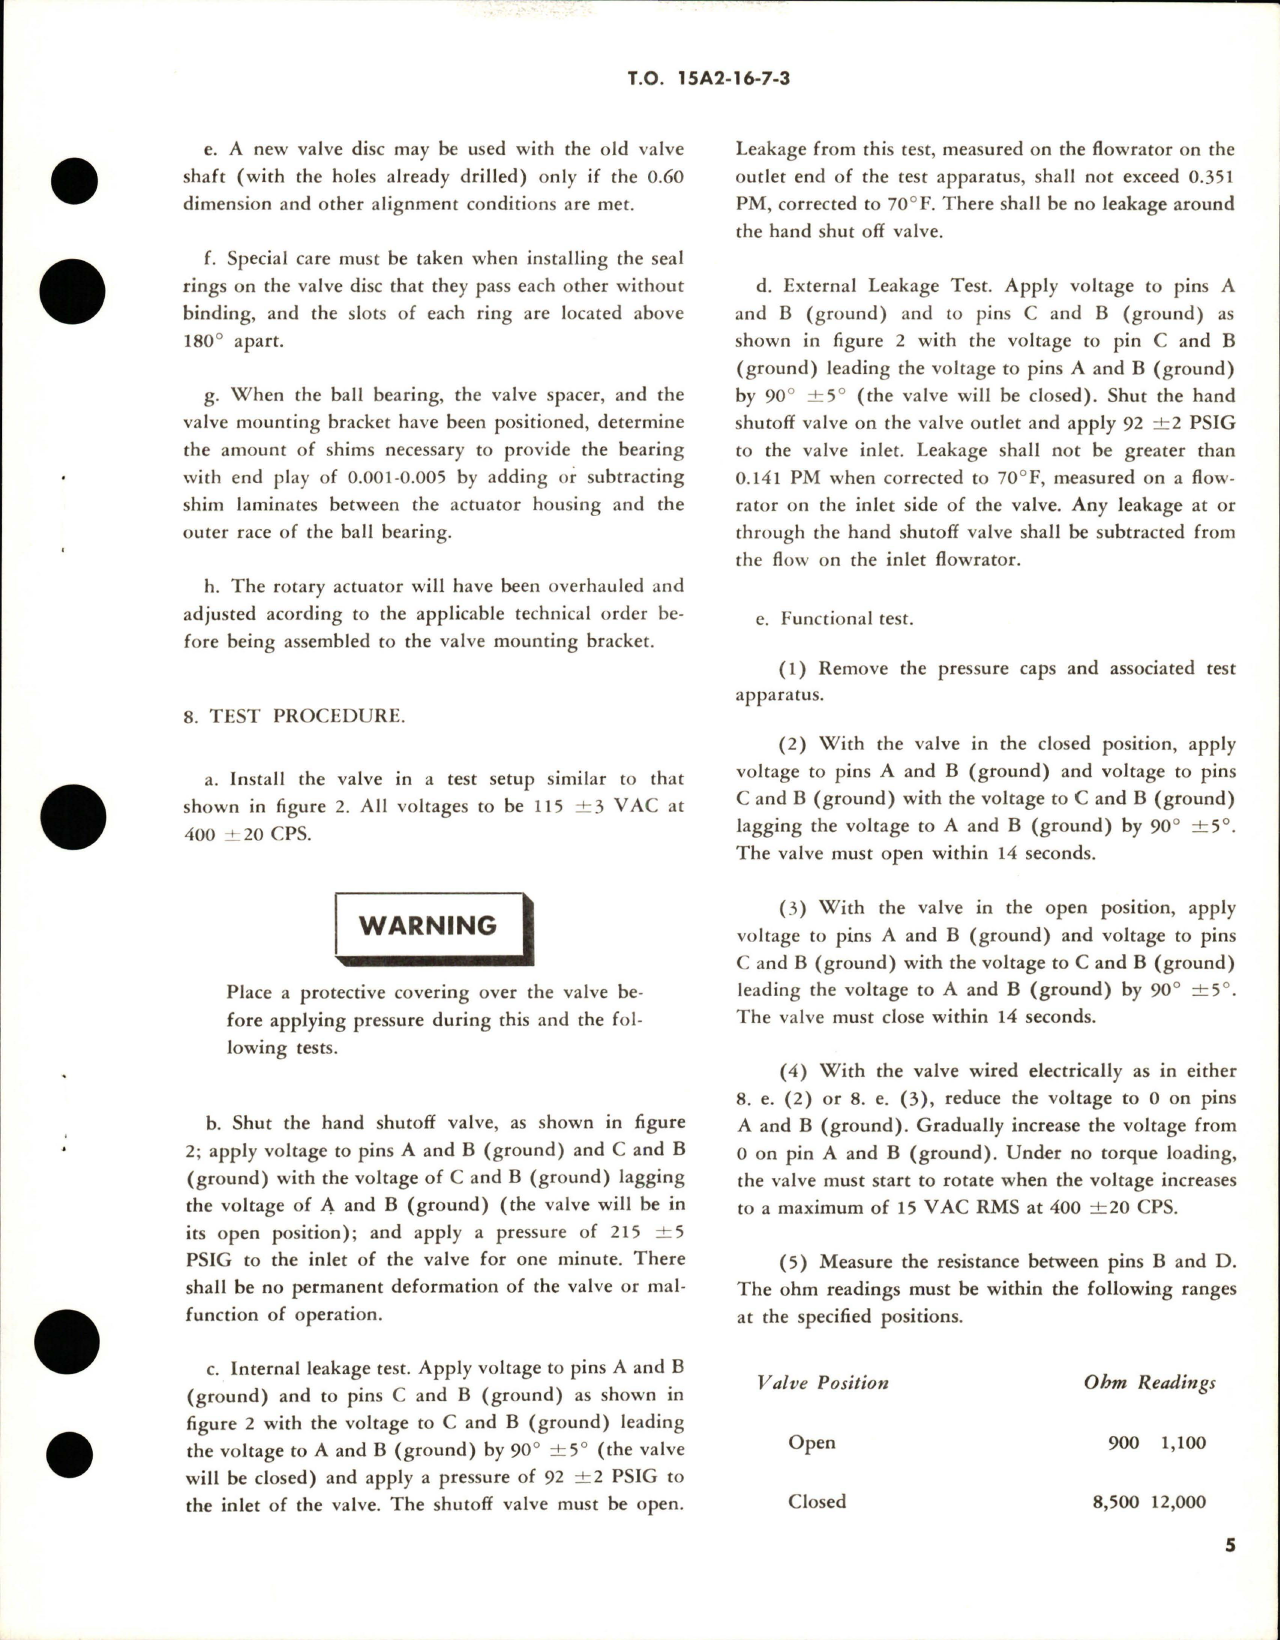 Sample page 5 from AirCorps Library document: Overhaul Instructions with Parts Breakdown for Valve and Actuator - Part 550664 